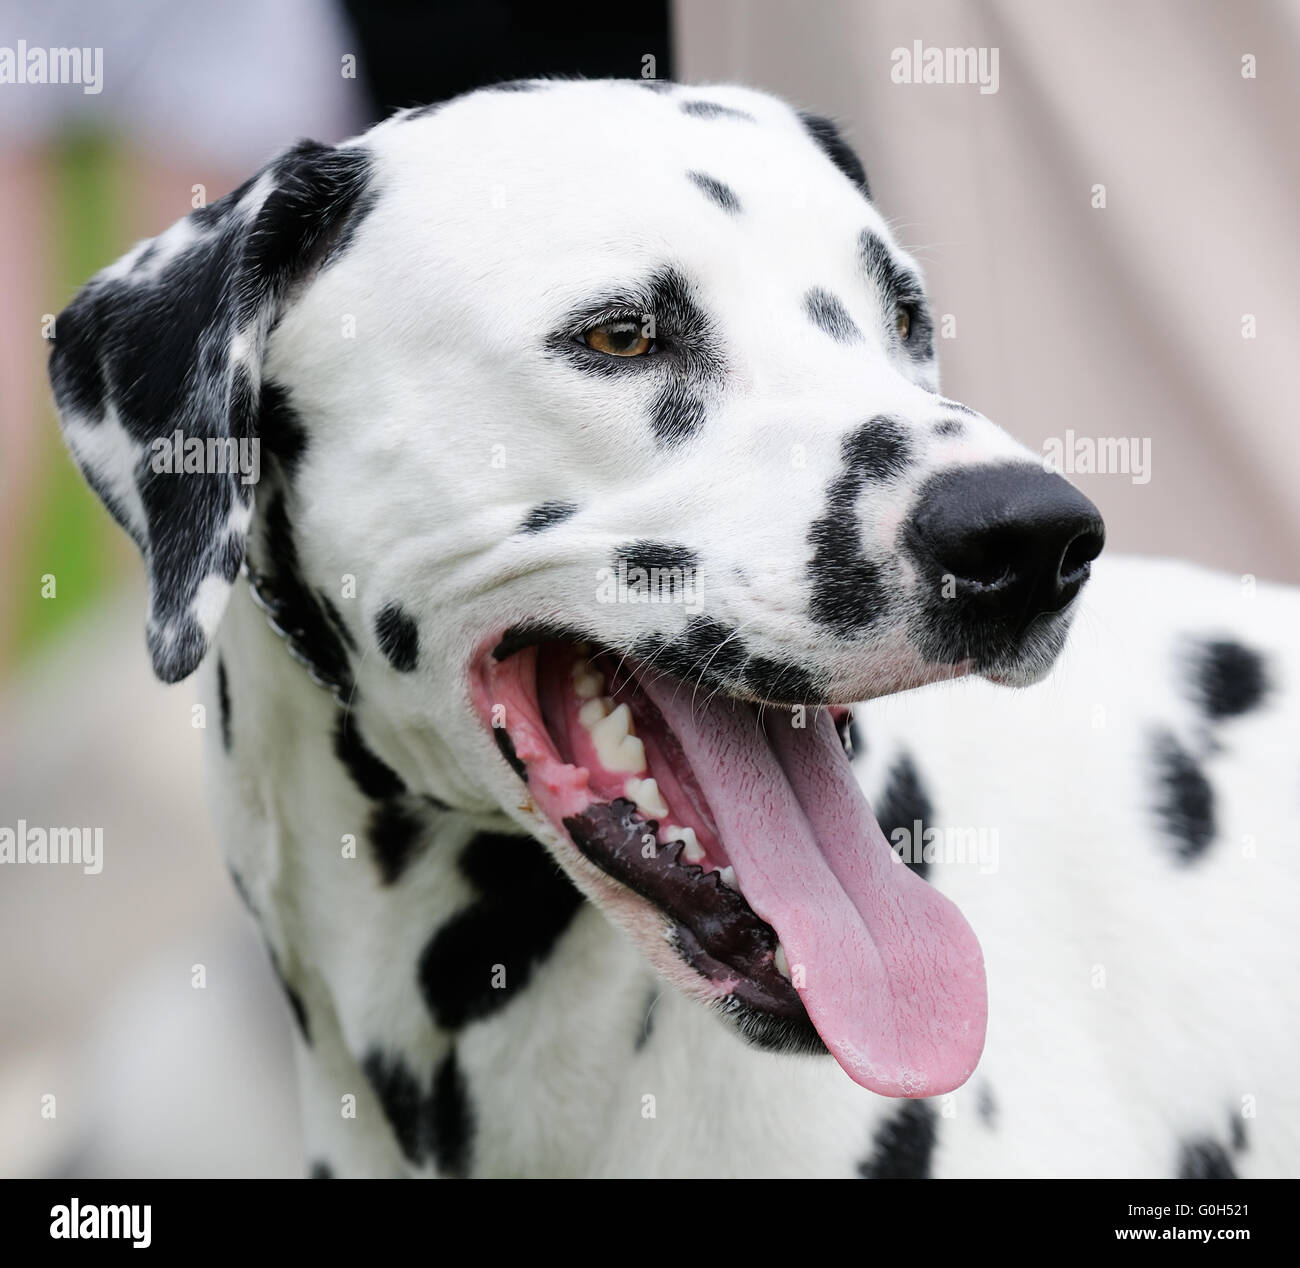 Dalmatian dog outdoors portrait over blurry background Stock Photo